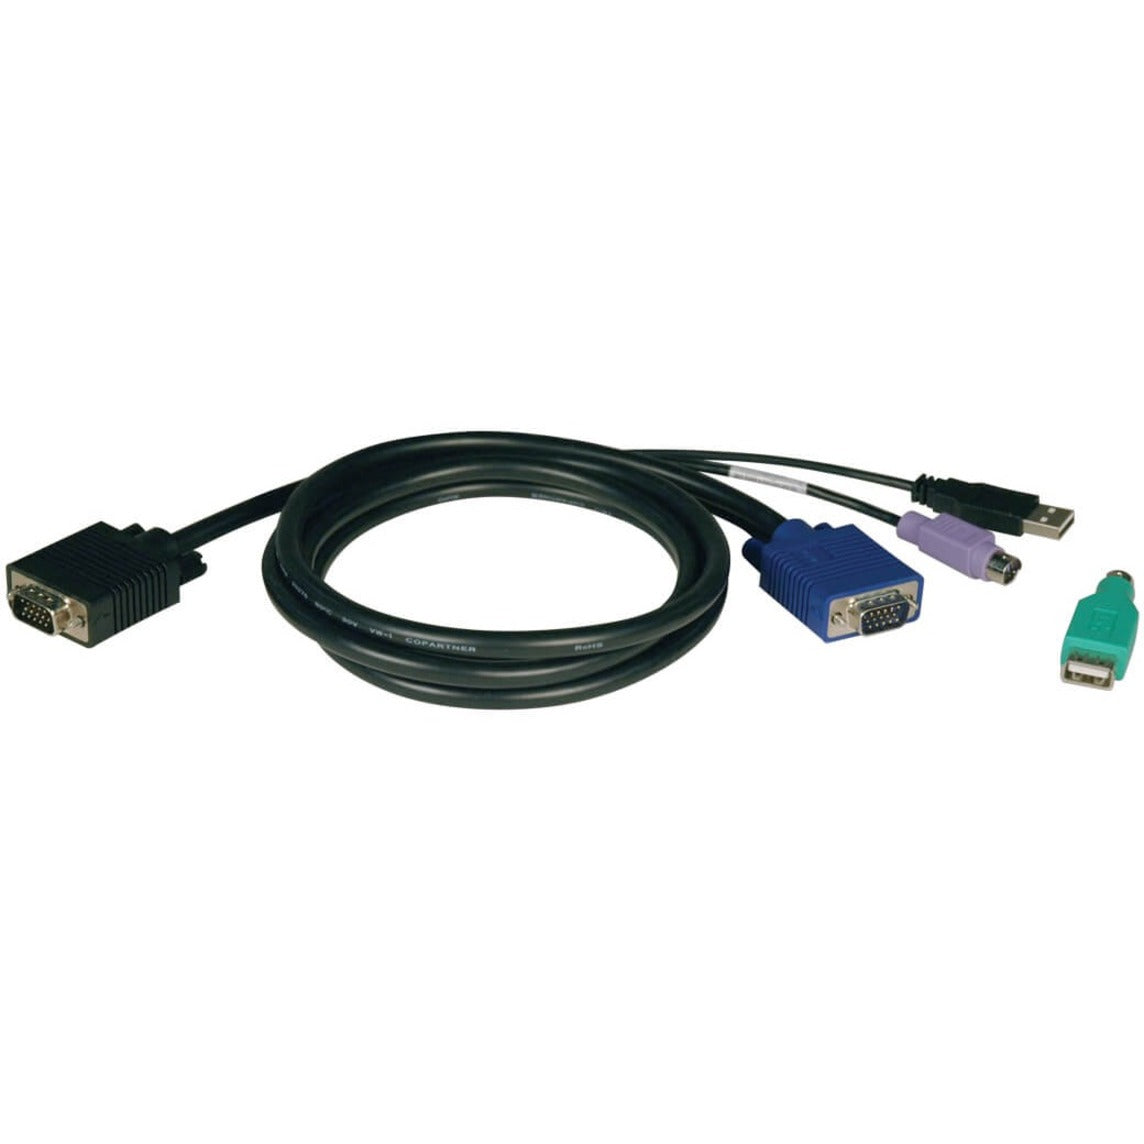 Tripp Lite P780-010 KVM Cable for B040 and B042 KVM, 10ft - Easy Cable Management and Superior Performance